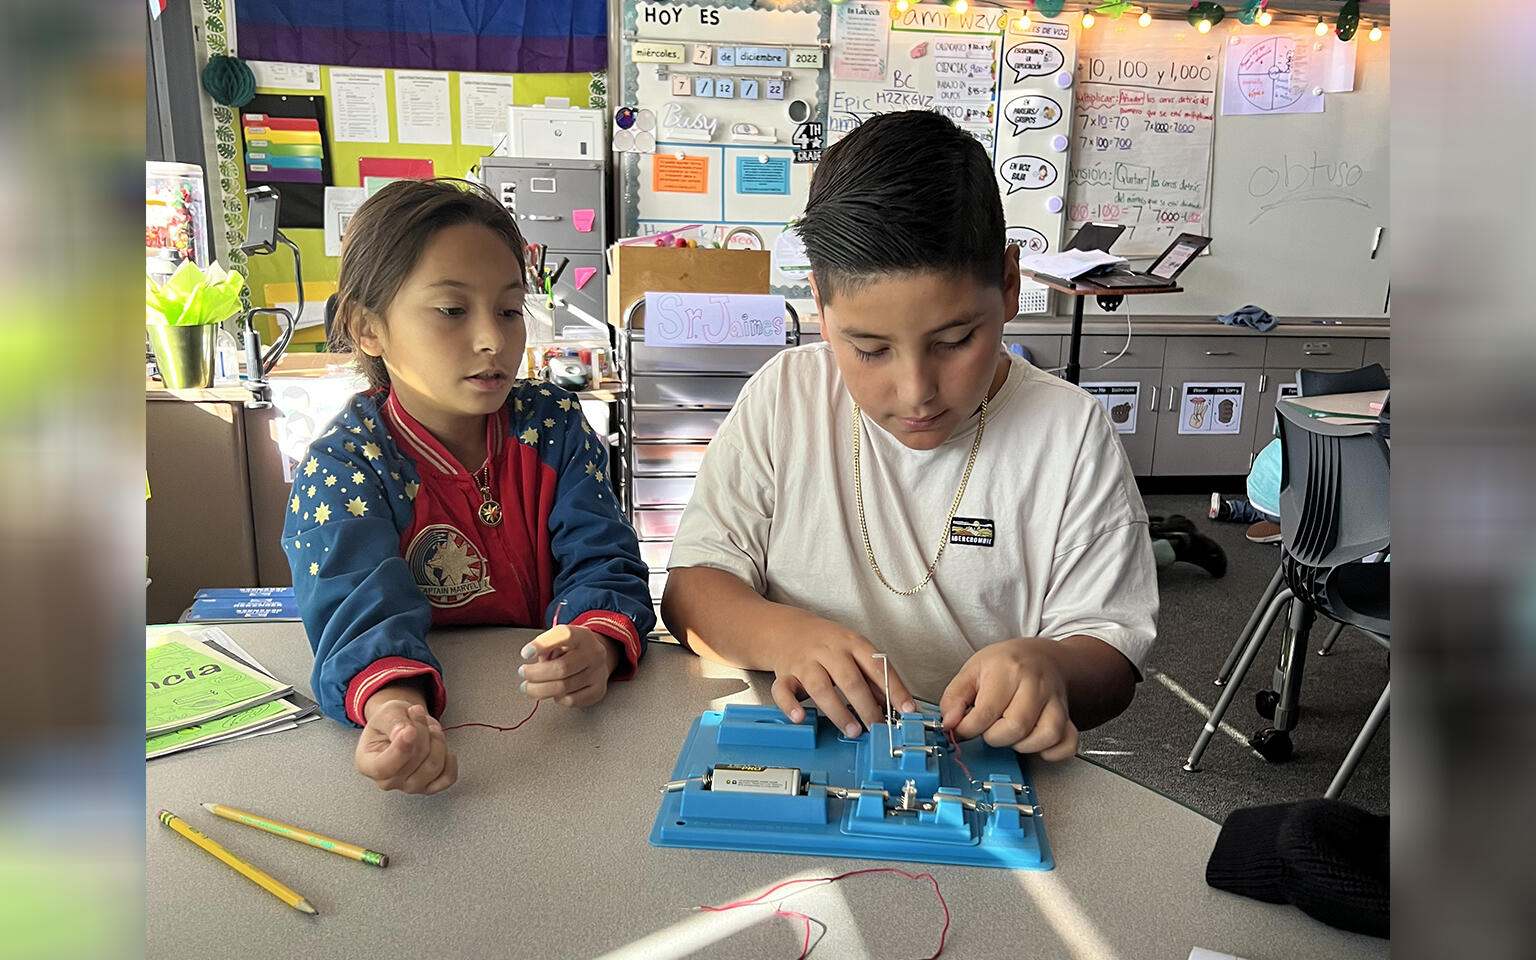 Fourth Grade future engineers working with electrical circuits and hands-on learning!